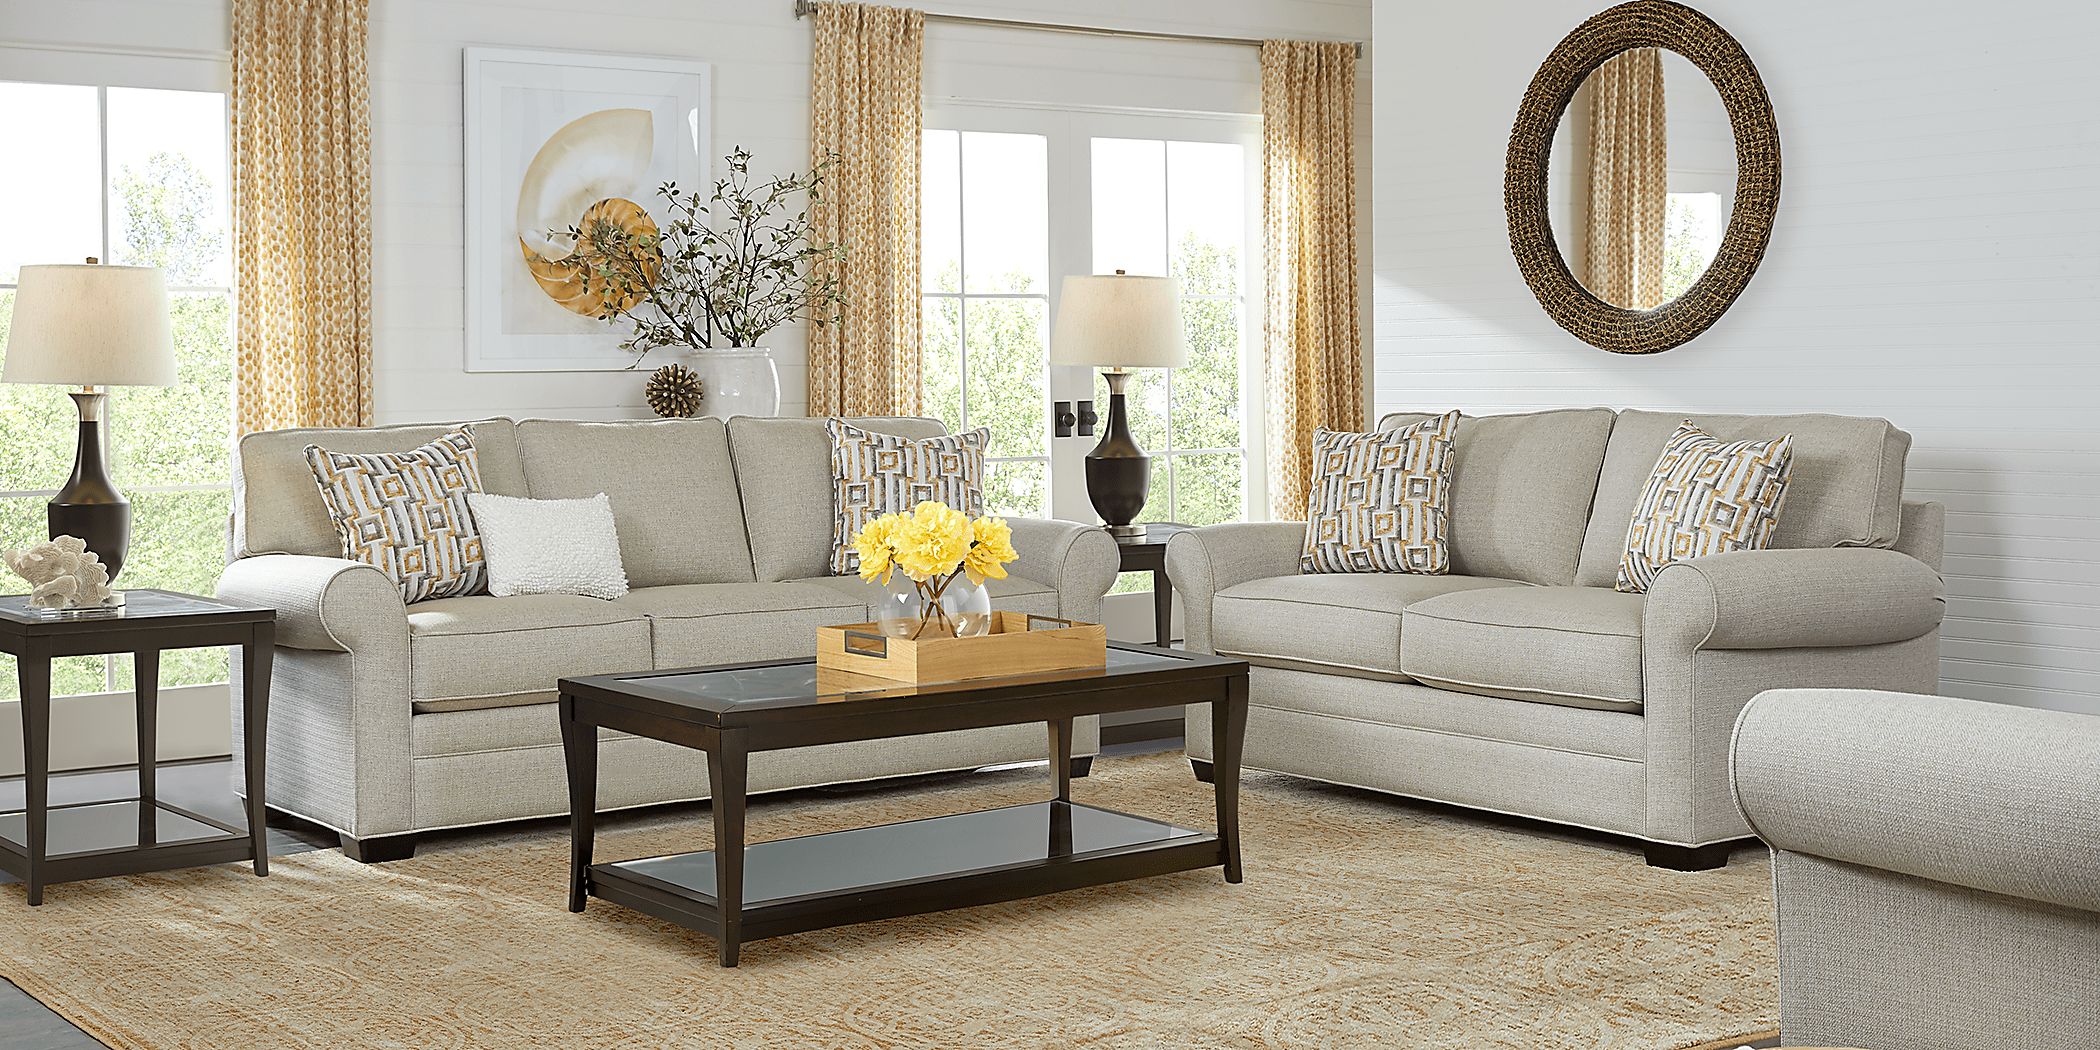 Cindy Crawford Home Bellingham Sand Textured 7 Pc Living Room with Sleeper Sofa